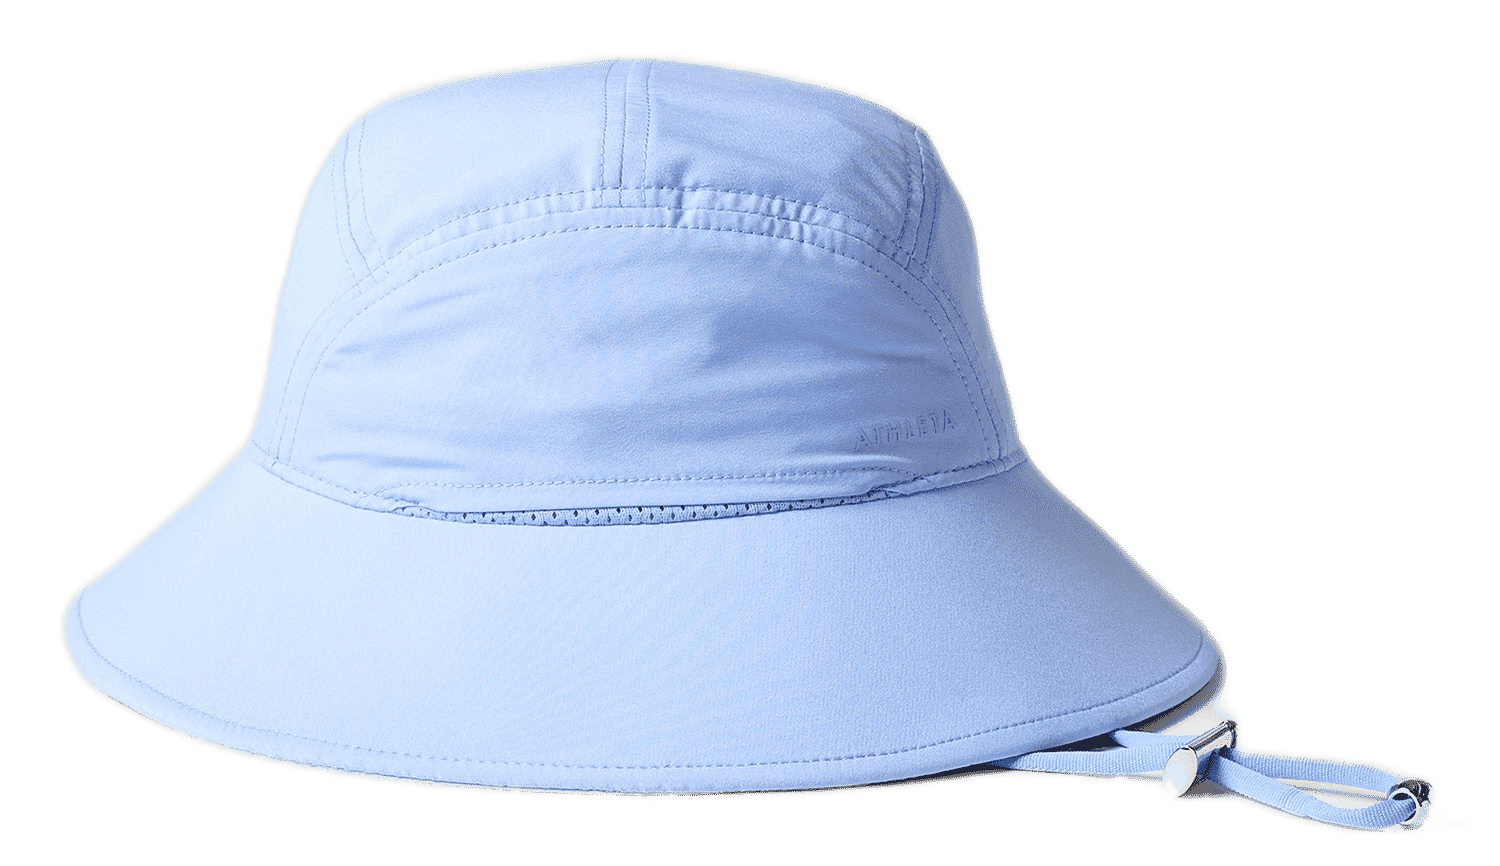 Athleta Excursion Trail Hat Travel Accessories Every Woman Needs